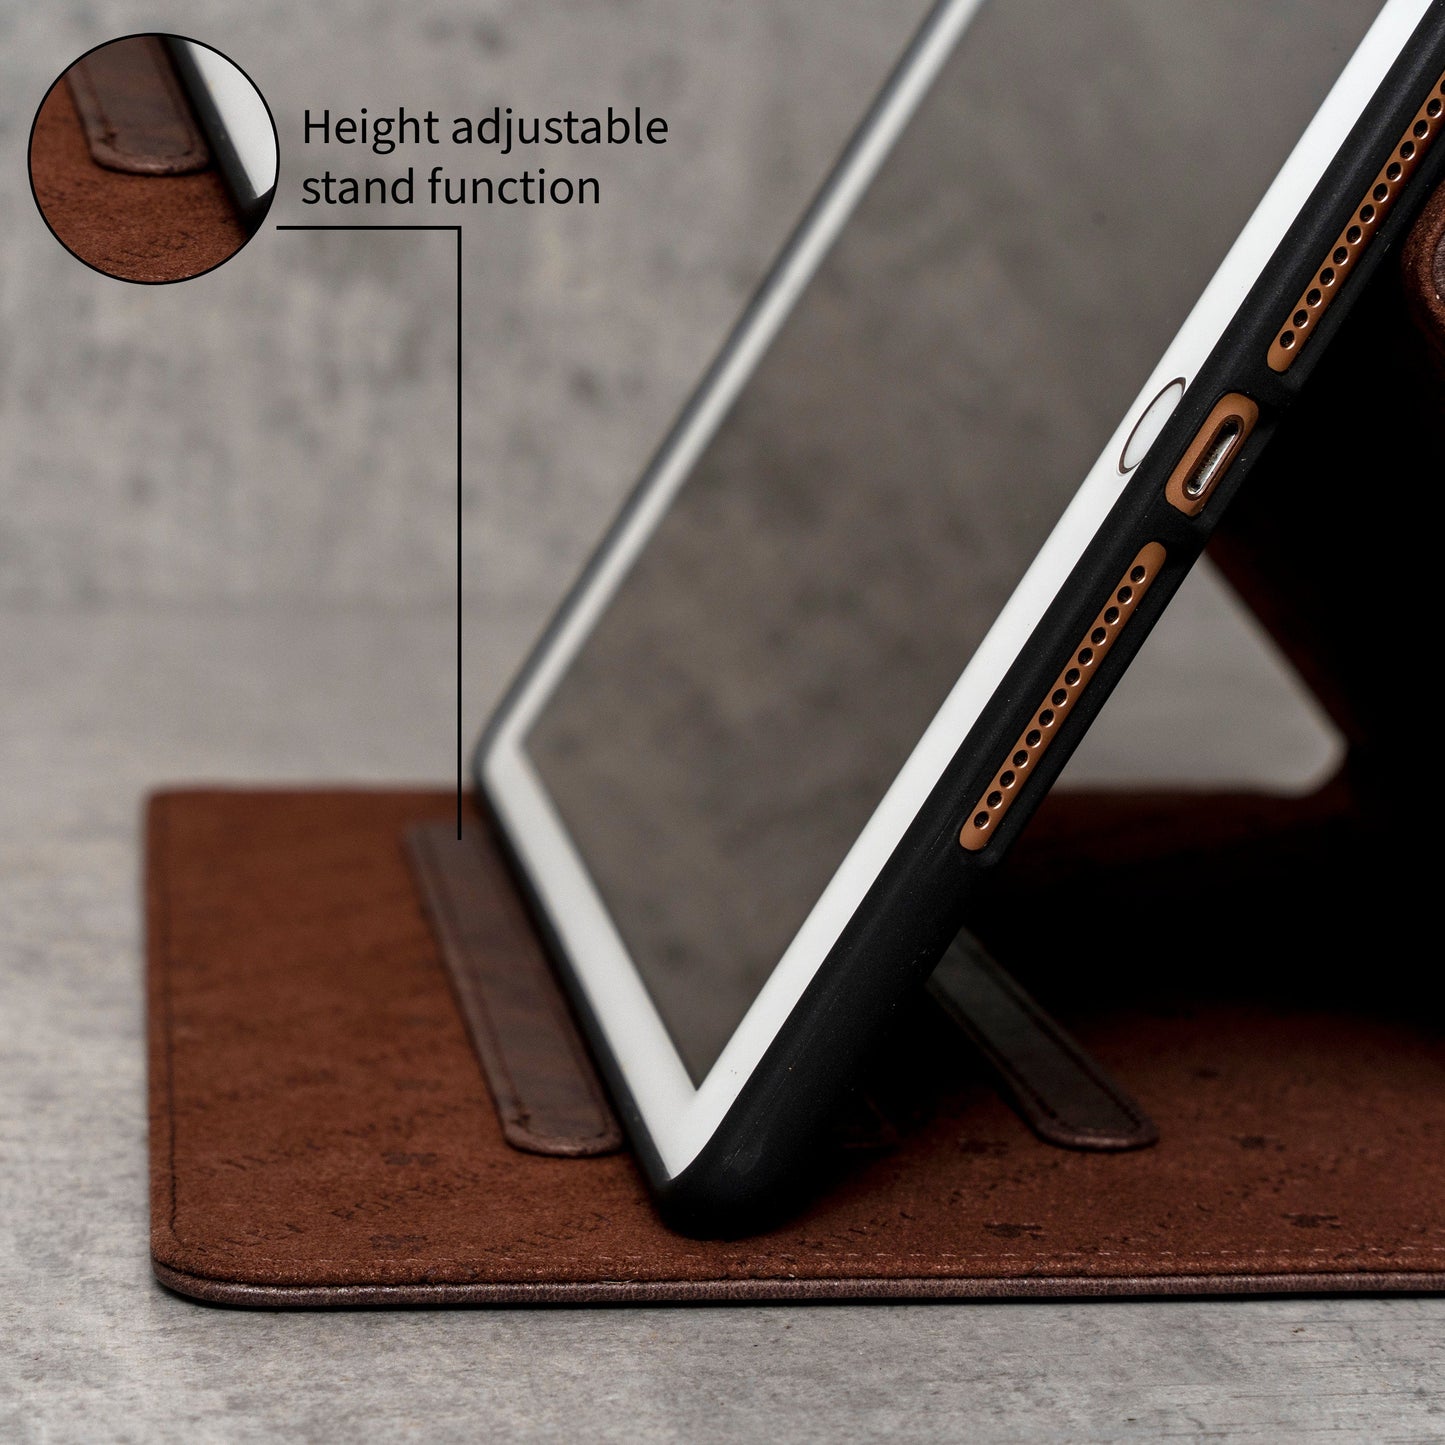 iPad Air 10.9" 4th/5th Generation 2020/2022 Release Leather Case. Premium Genuine Leather Stand/Cover/Flip Case (Chocolate Brown)